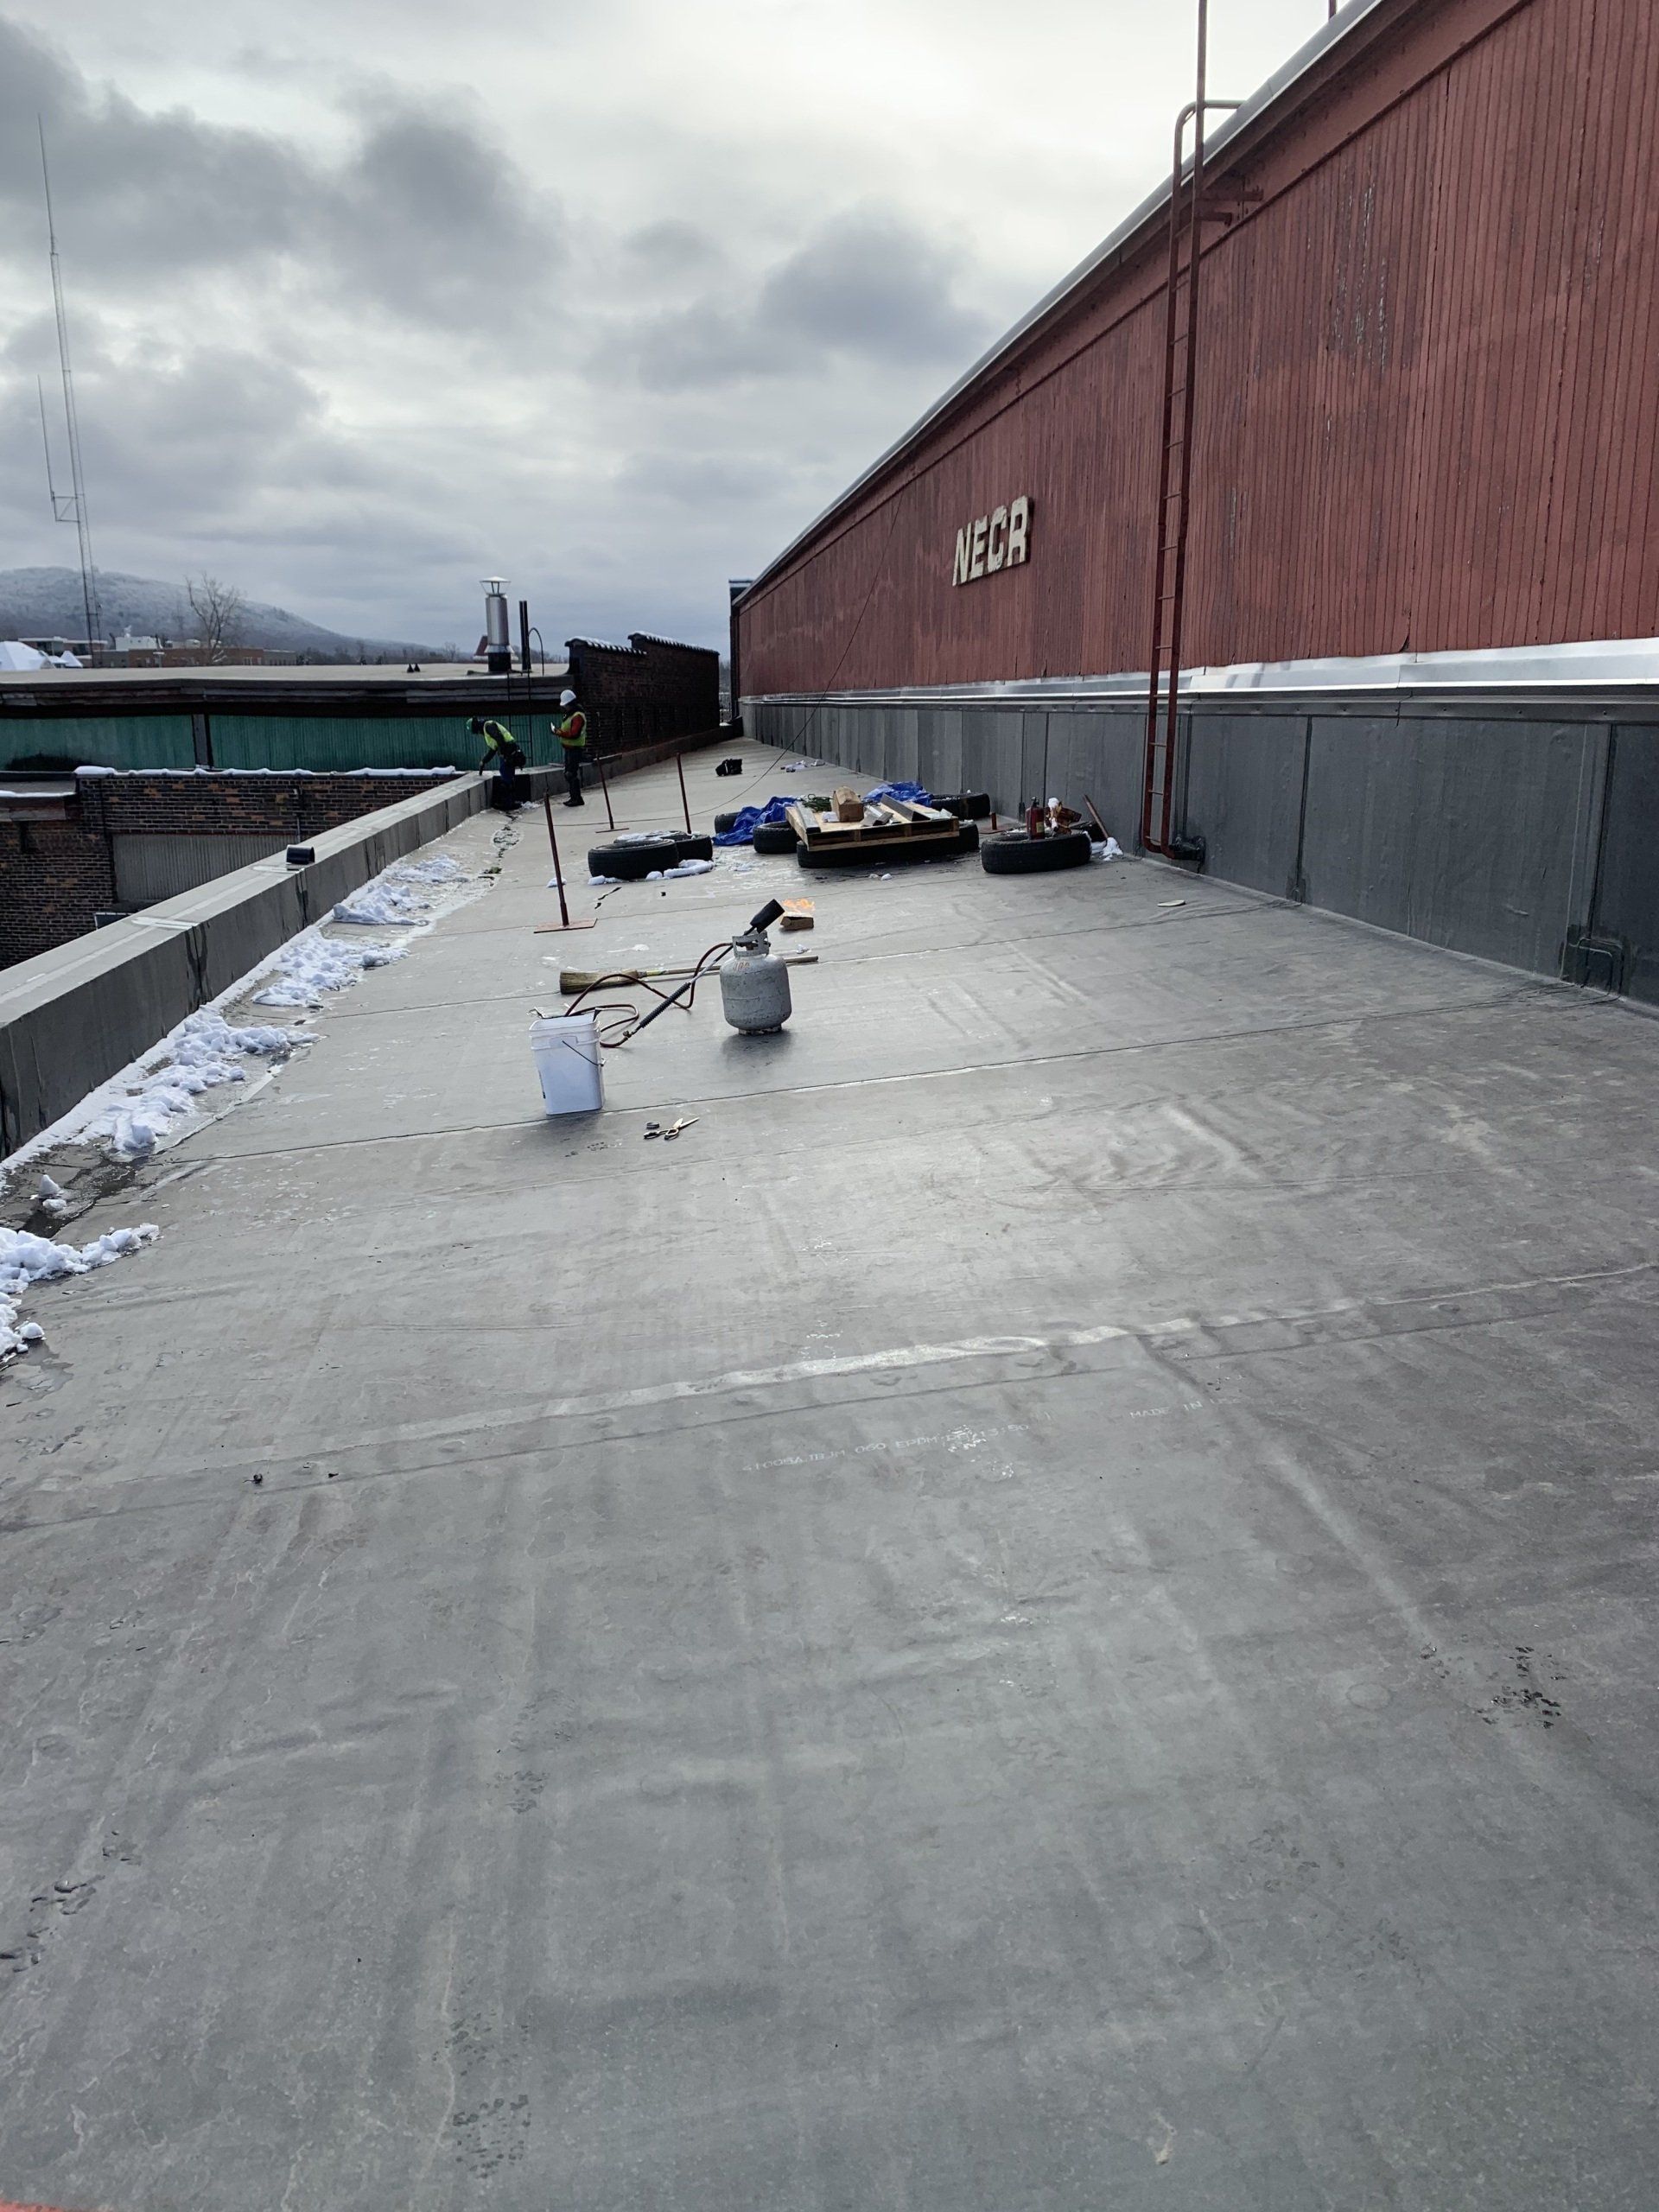 A flat commercial roof maintained by Rodd Roofing in northern Vermont